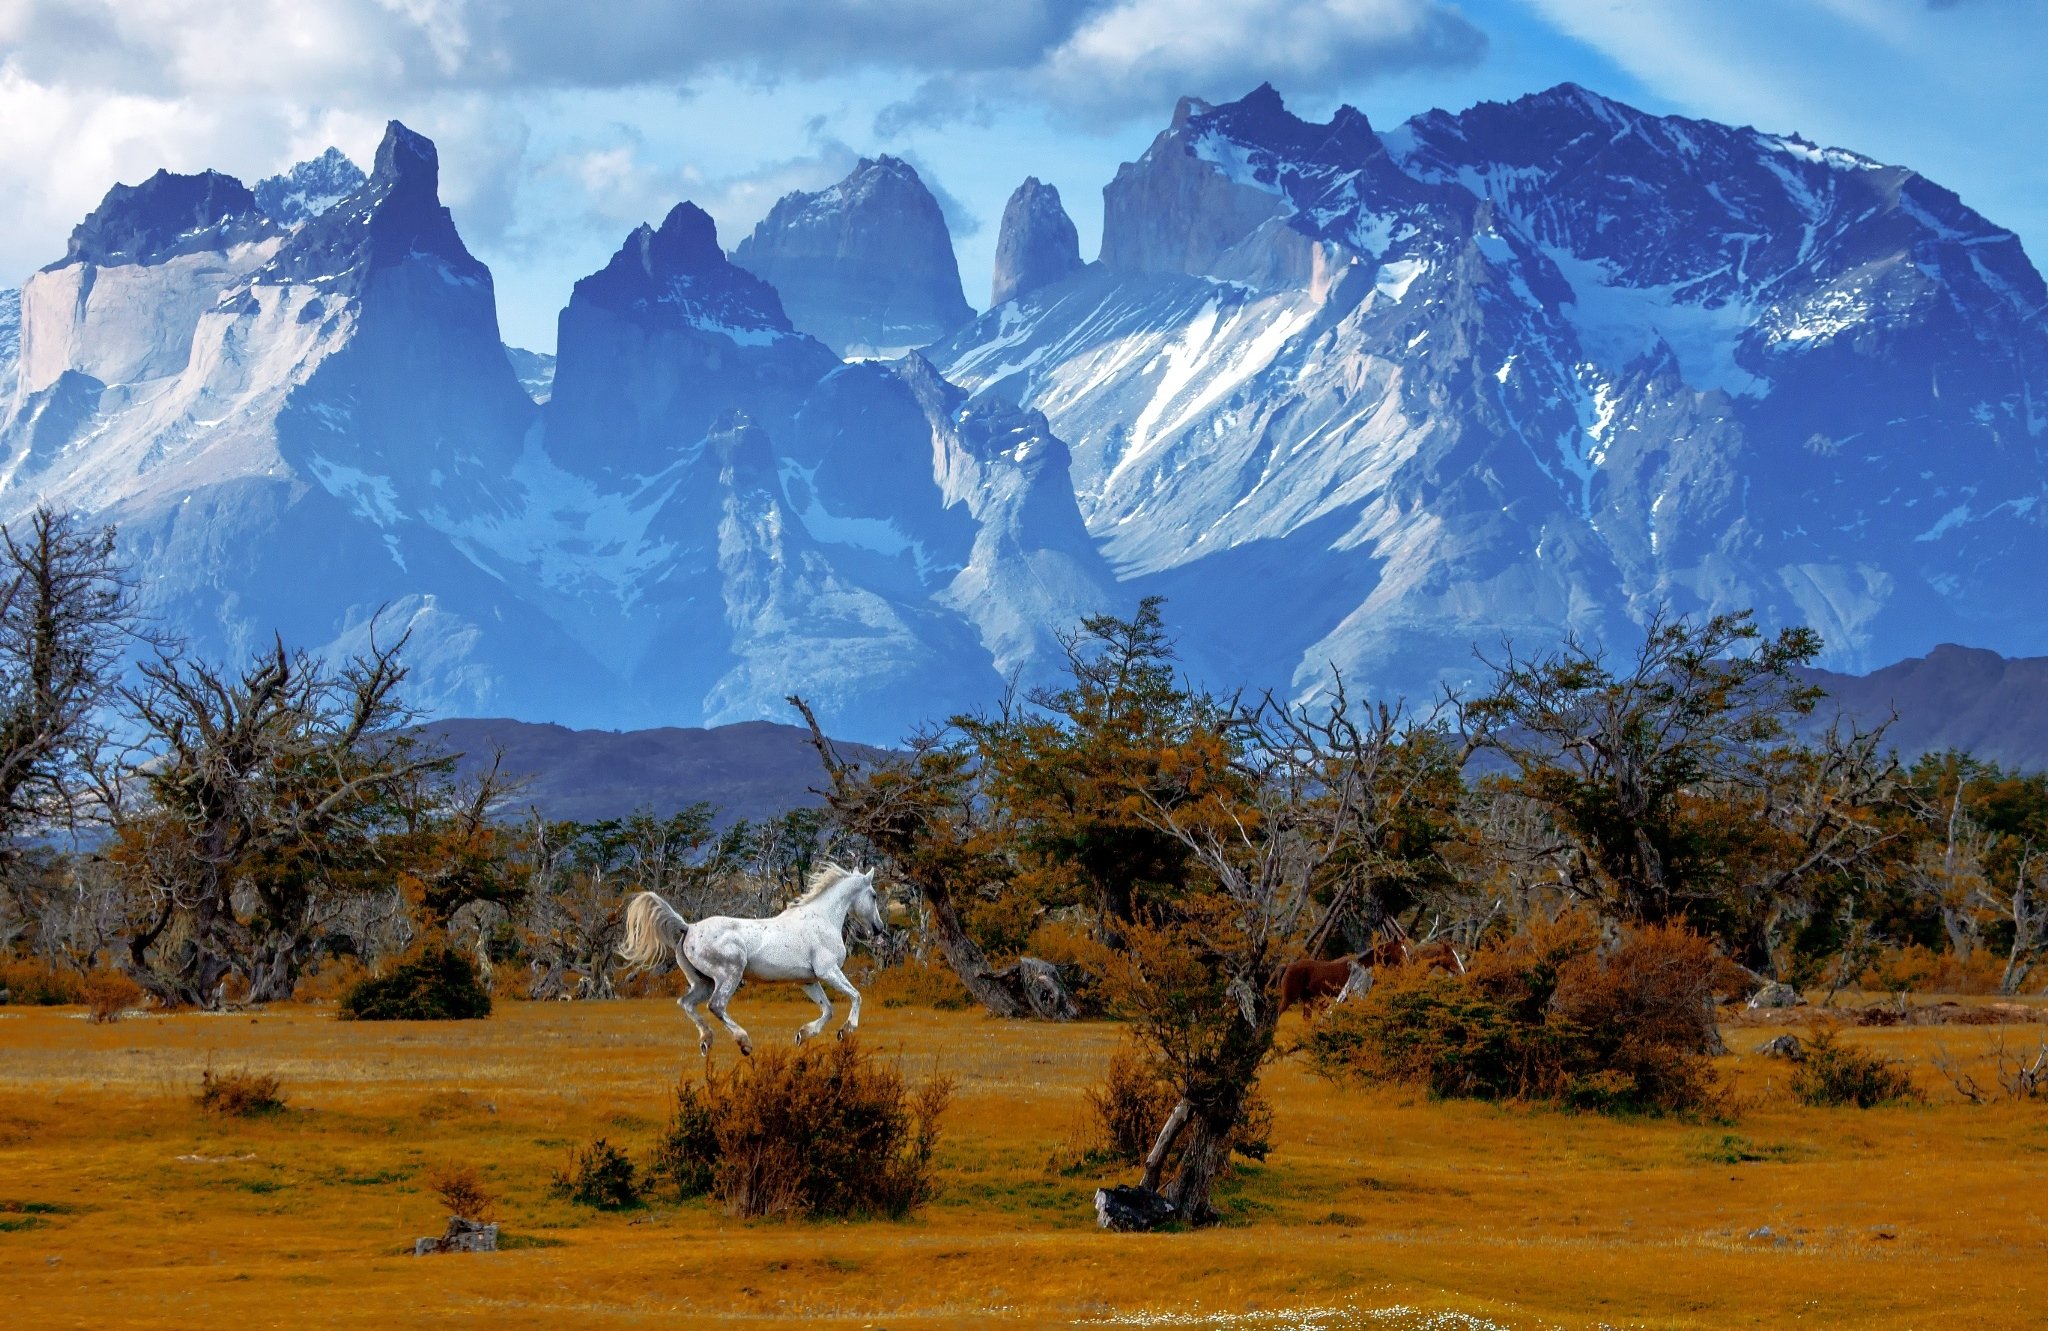 mountains, Trees, Horse, National, Park, Torres, Del, Paine, National, Park, Chile, Patagonia, Autumn Wallpaper